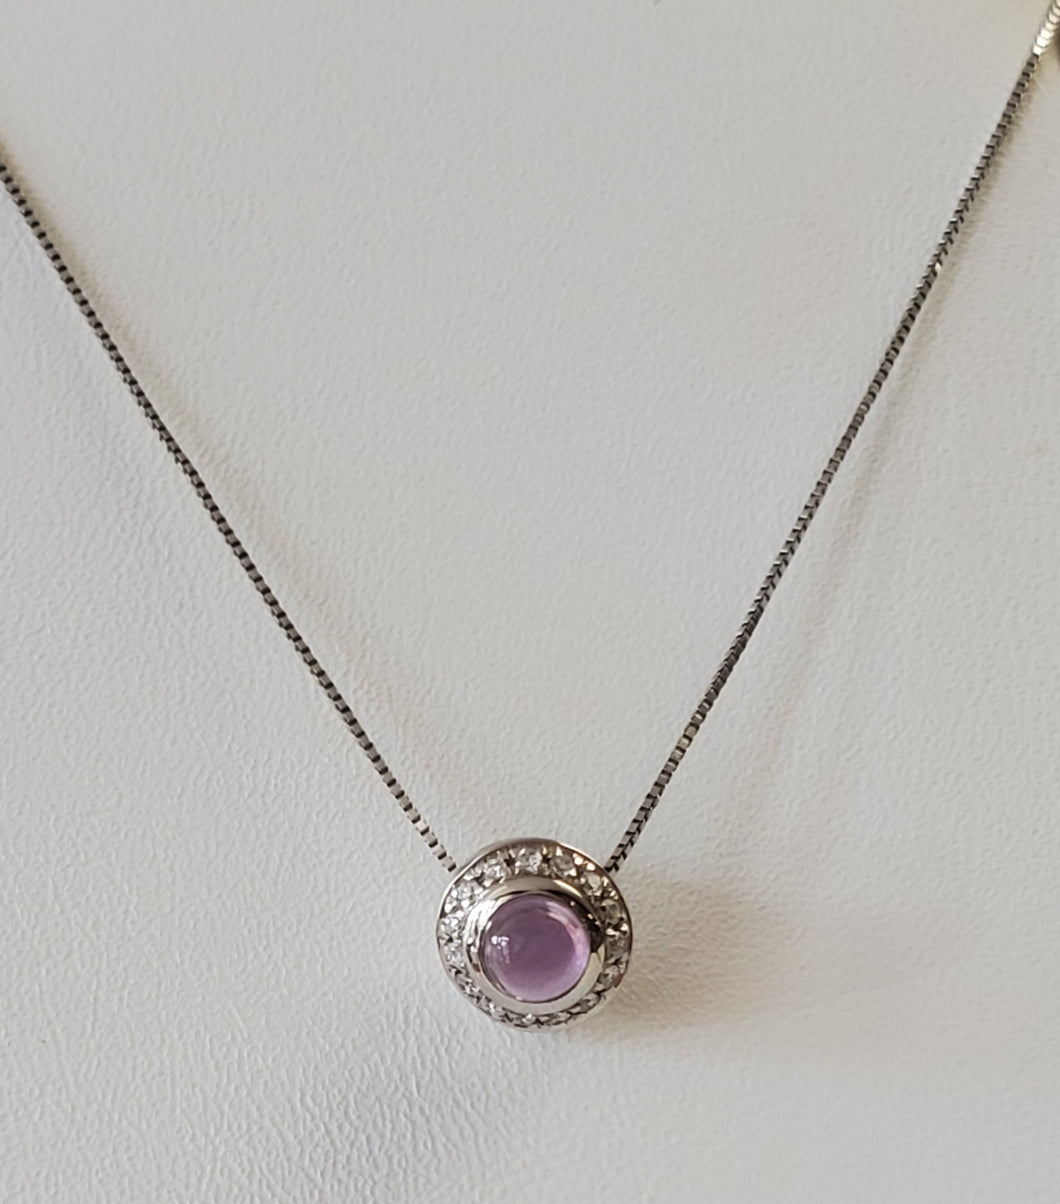 14k white Gold Cabochon Amethyst and Diamond Necklace With Pendant